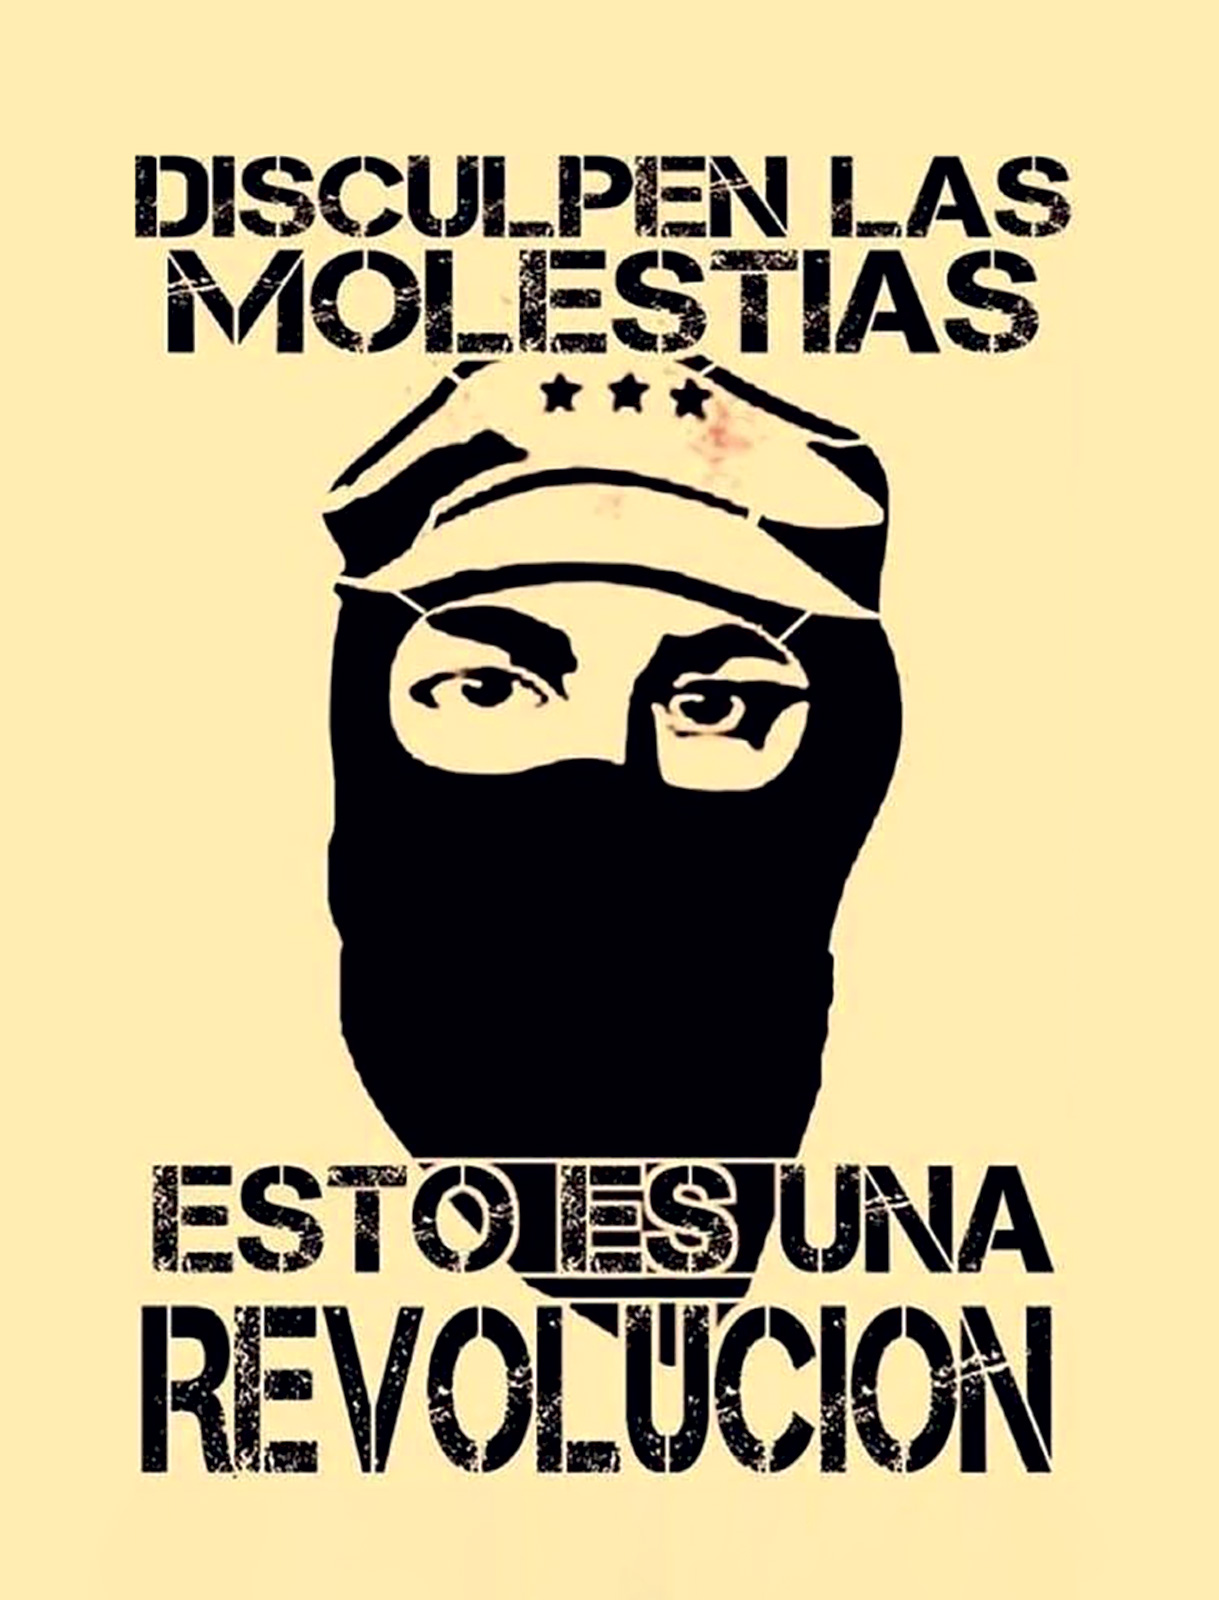 Póster zapatista